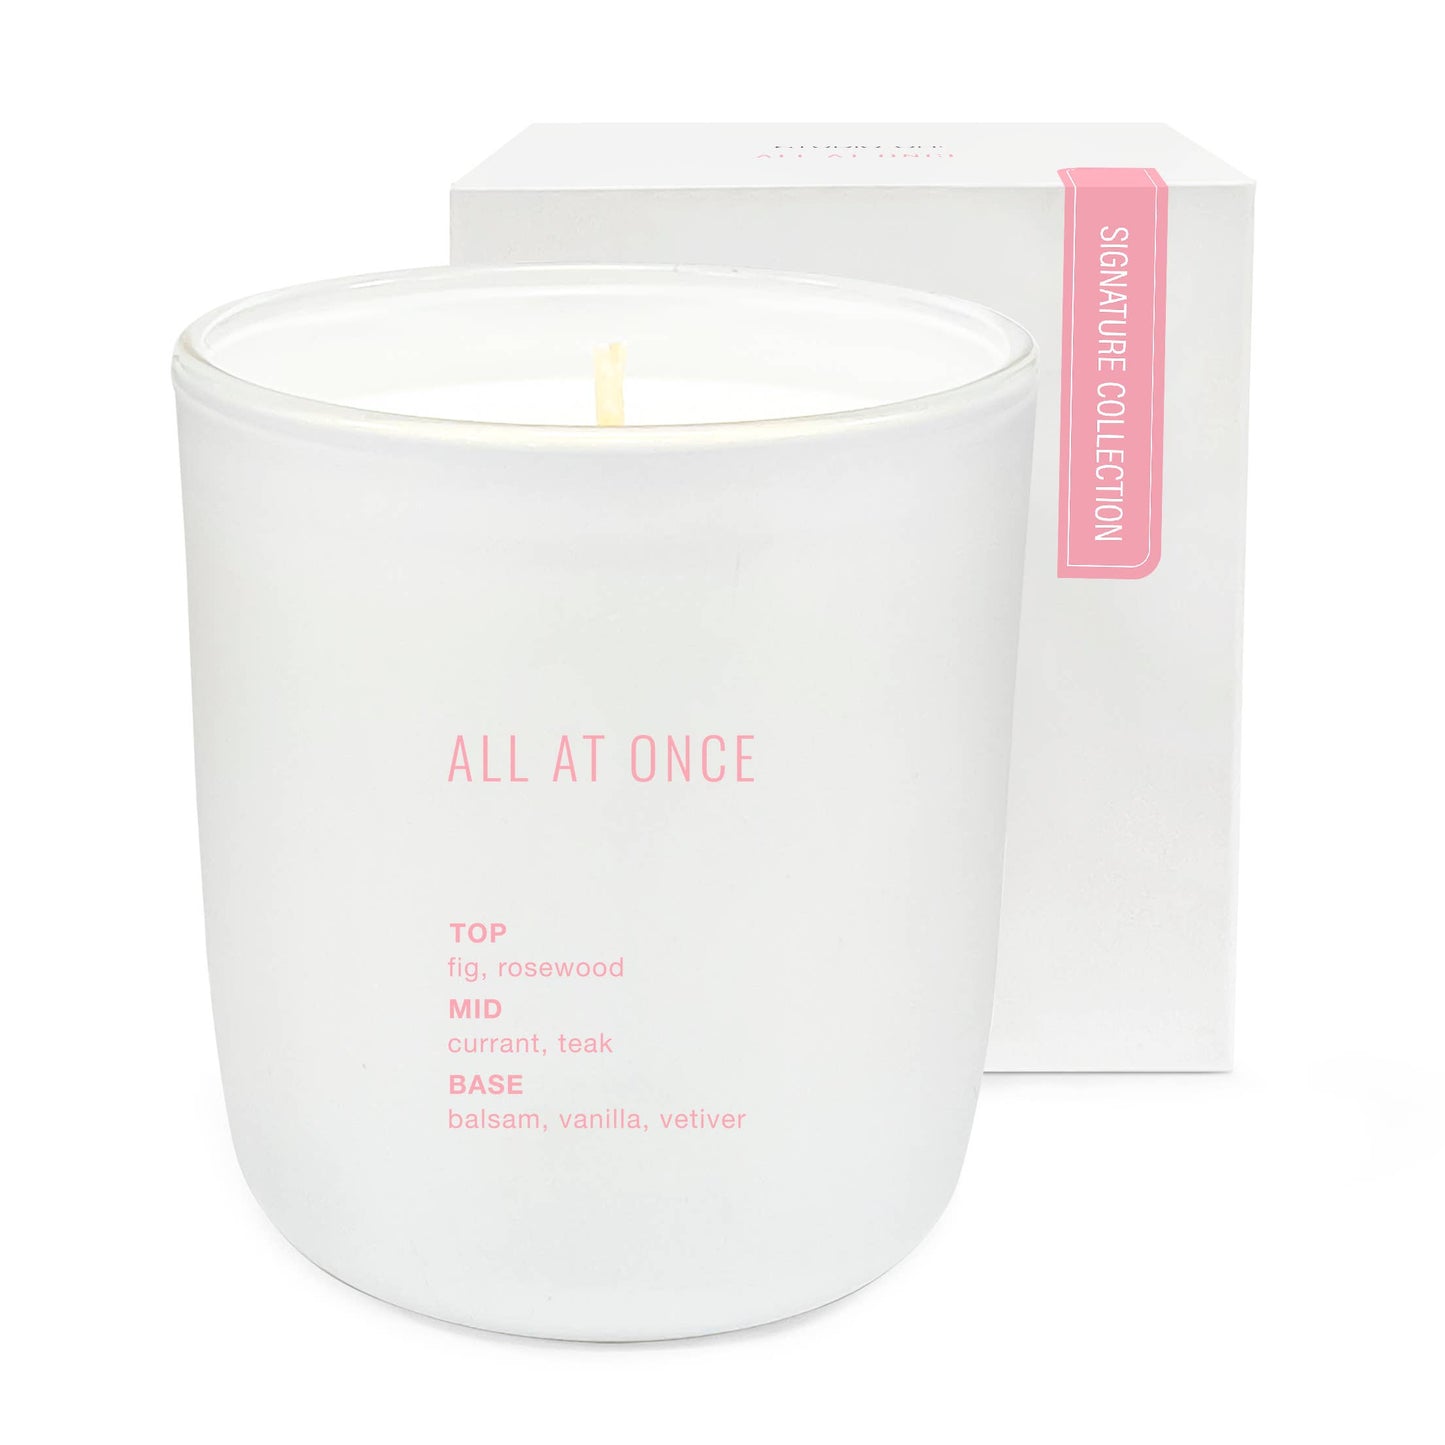 All at Once Signature Candle